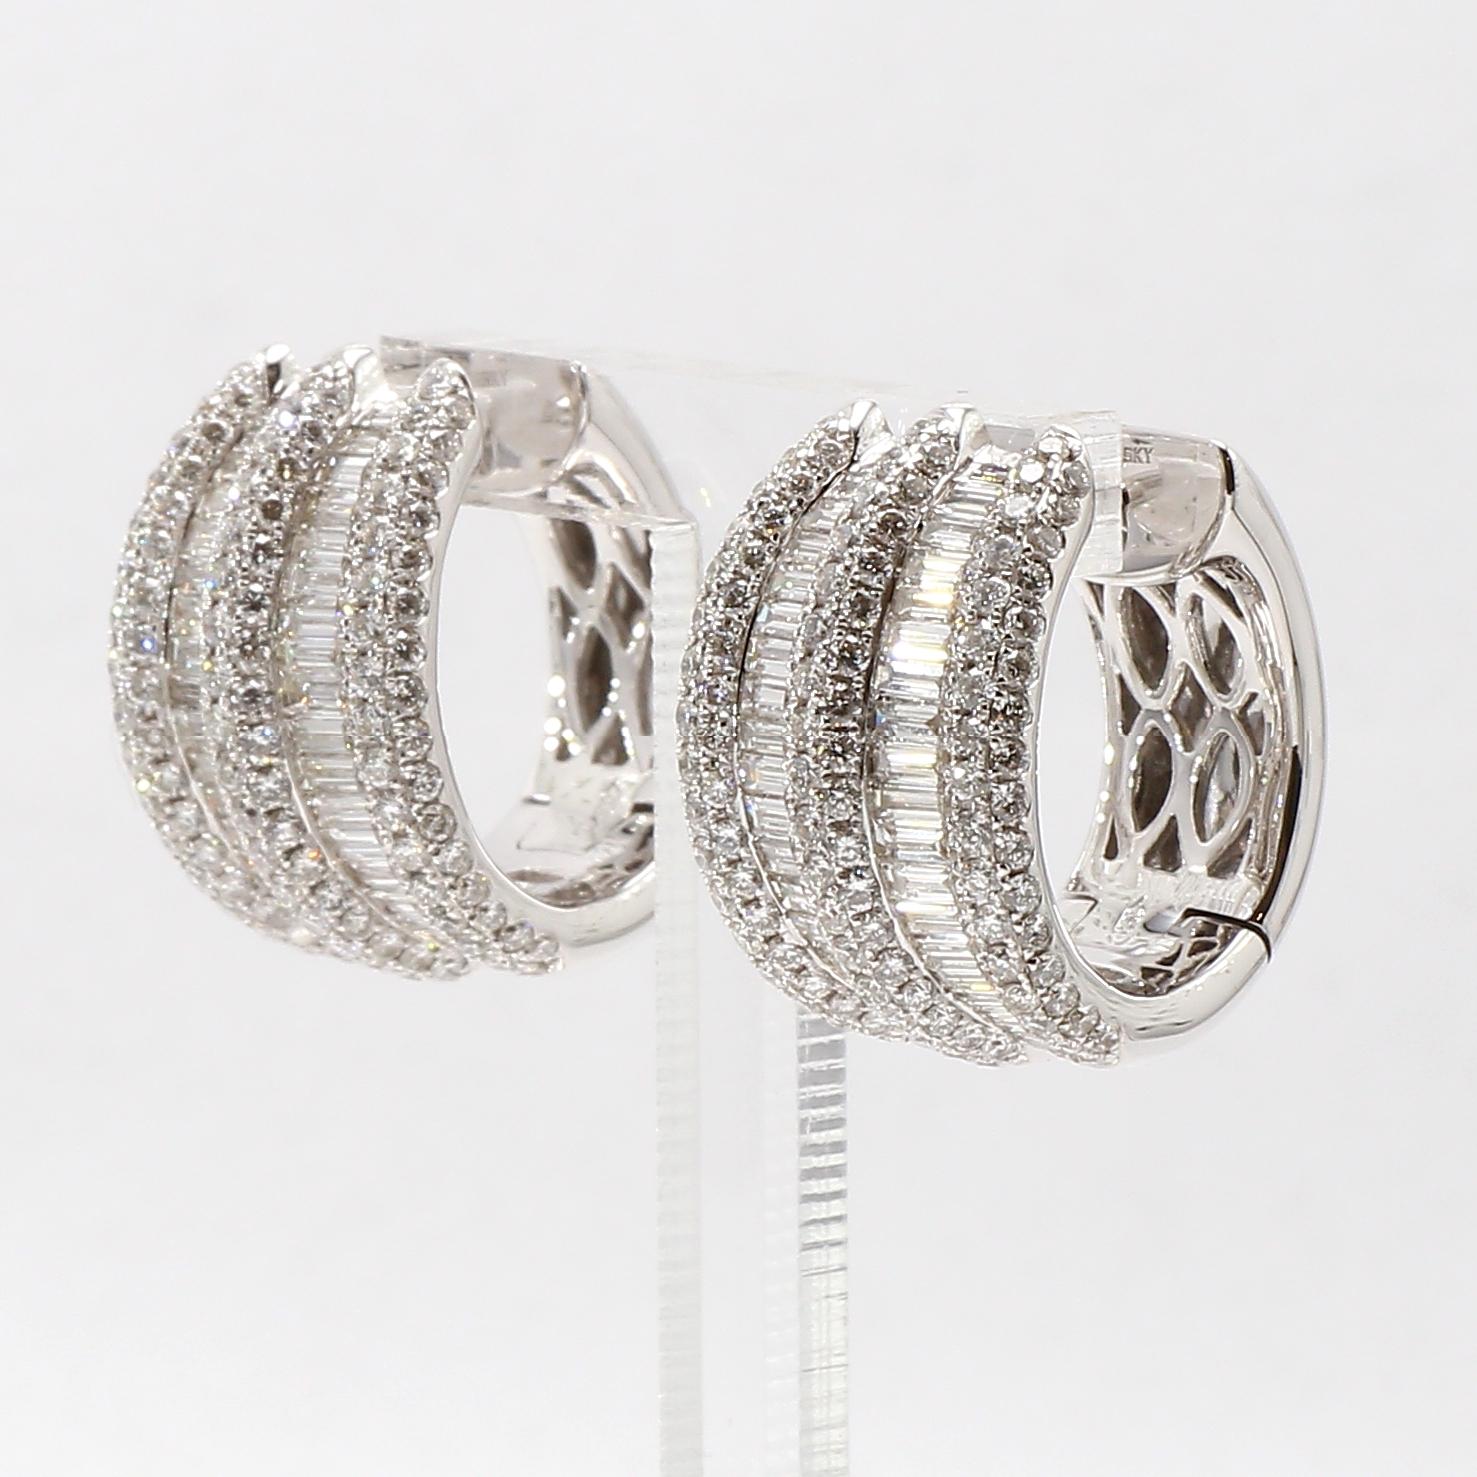 Elegantly handcrafted pair of Contemporary Diamond Hoop Earrings.
Round Brilliant Cut White Diamonds totalling 2.12 ct G-H Color, VS-SI Clarity and Baguette Cut White Diamonds totalling 1.58 ct G-H Color, VS-SI Clarity
Pave Set Diamond Designer